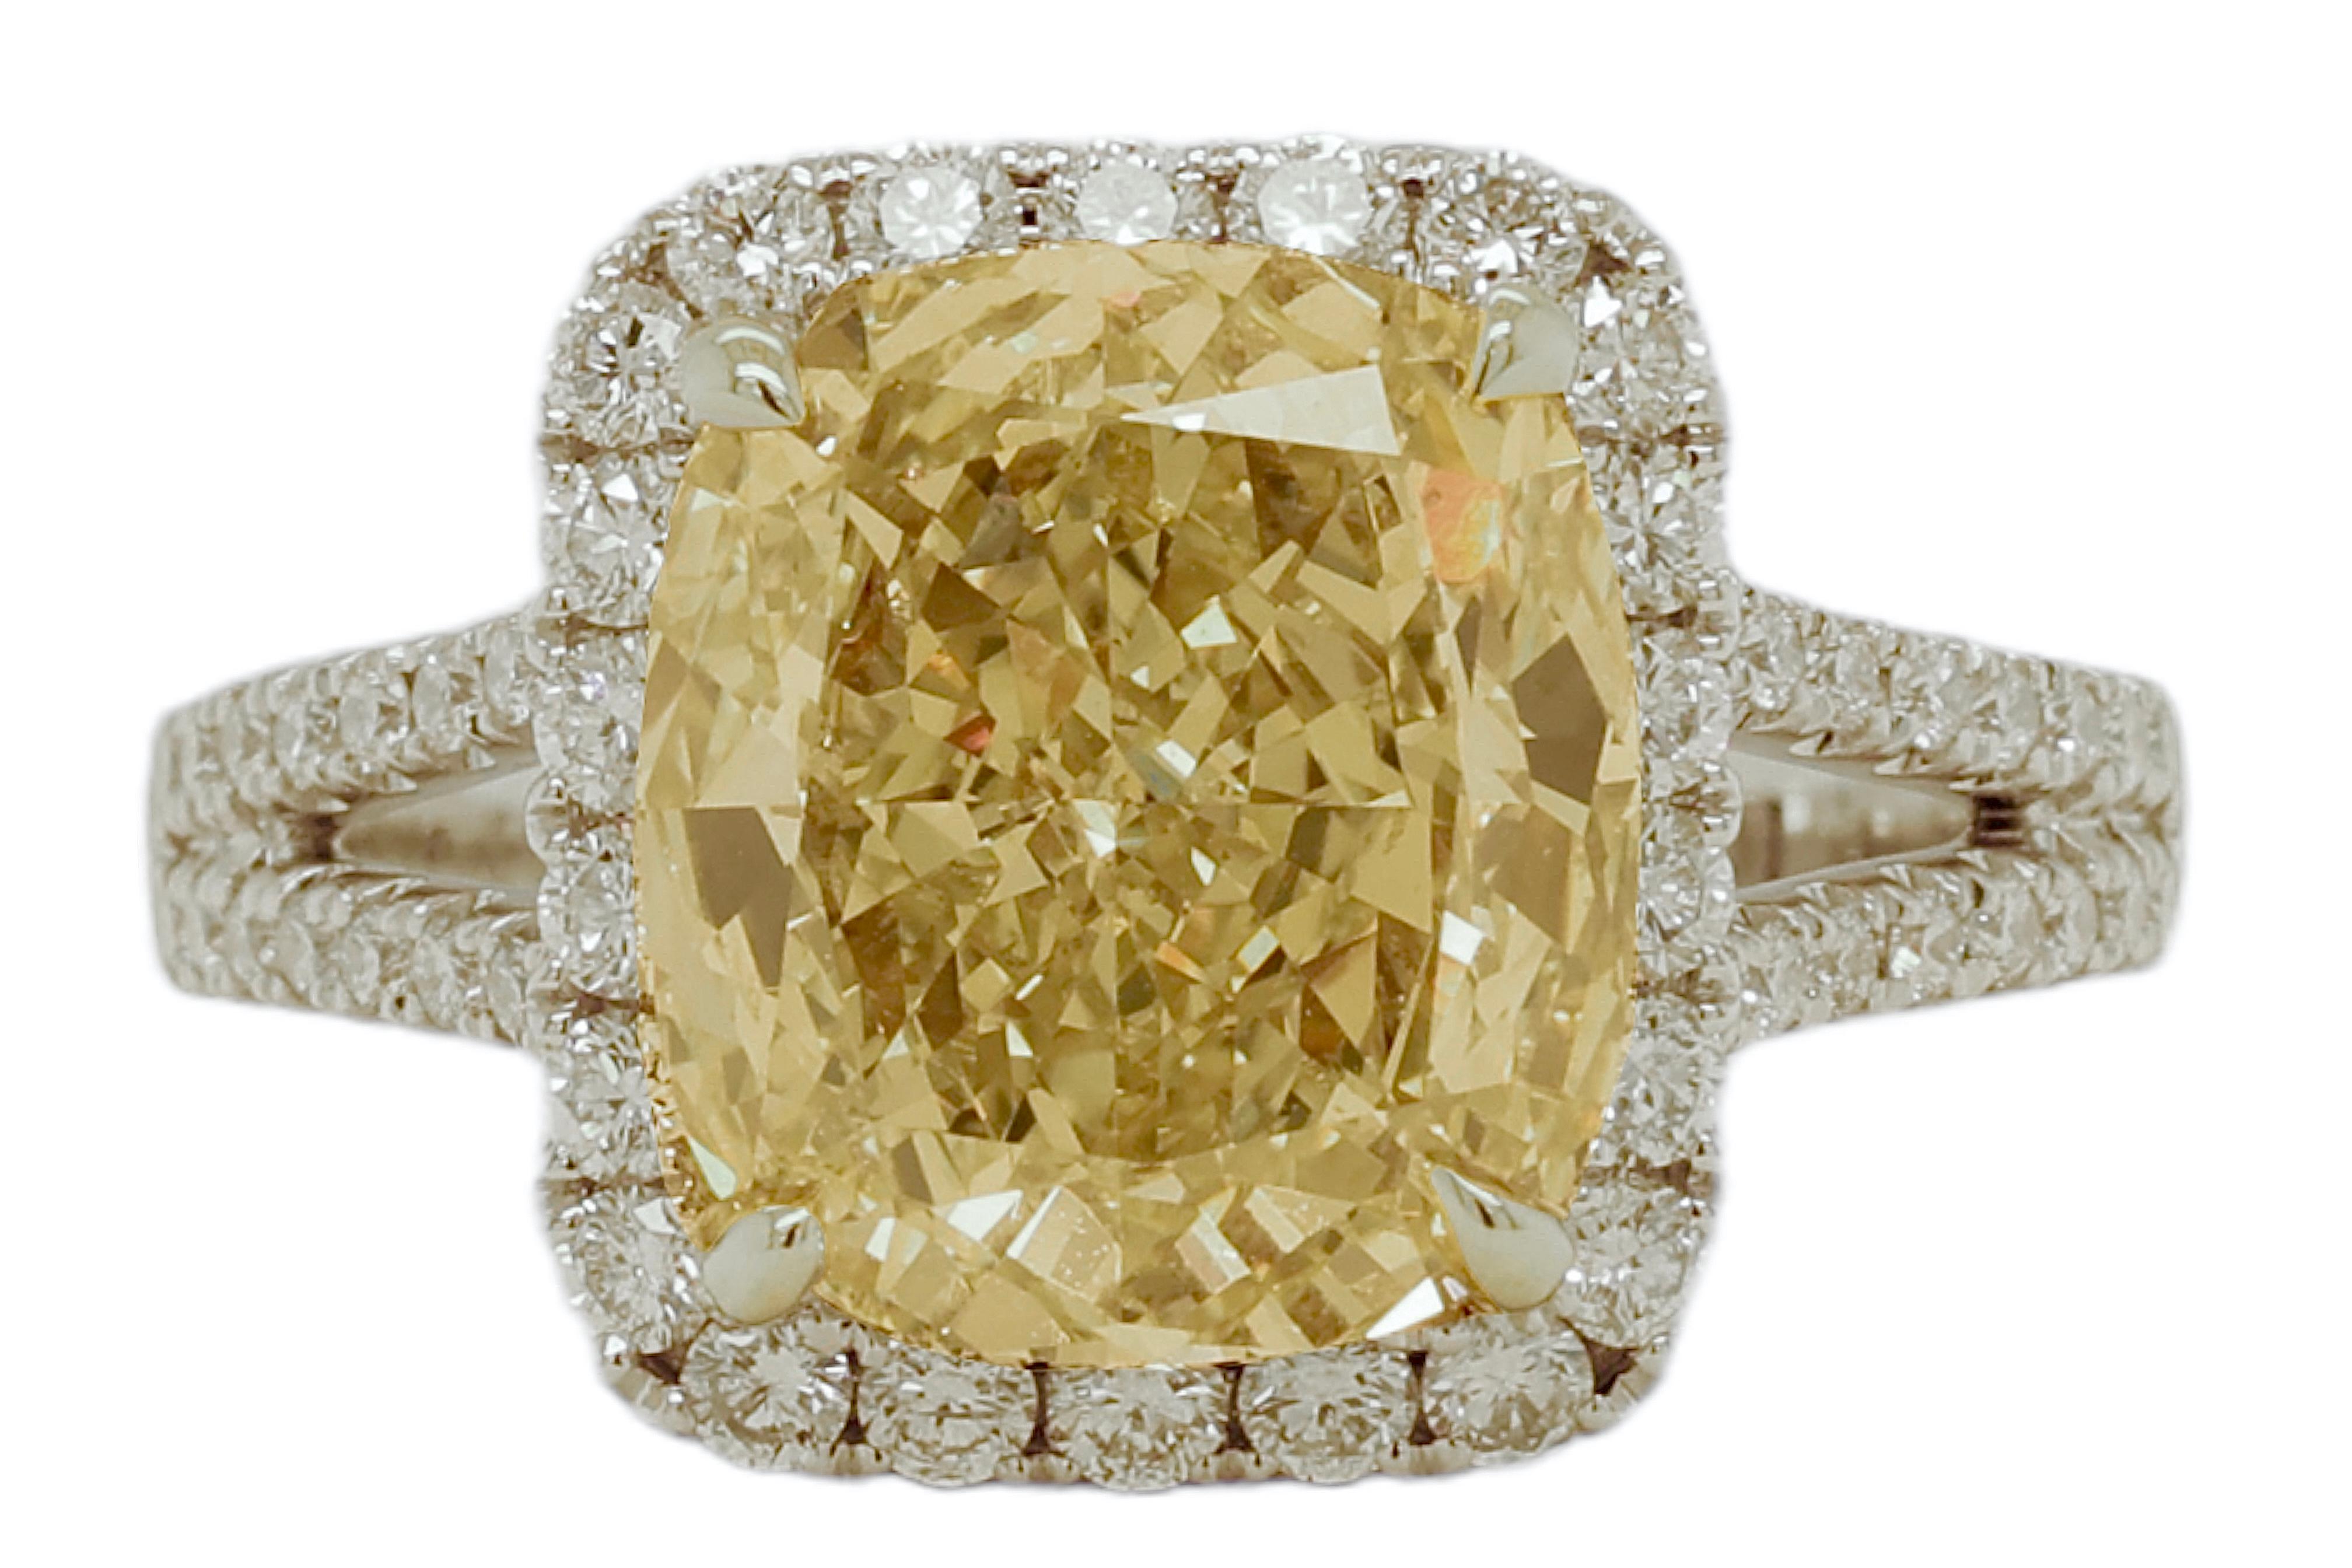 Magnificant 18 kt. White Gold 5.9 Ct Diamonds Engagement Ring With 5 Ct Large Fancy Light Yellow Diamond

Center diamond: 5 Ct Fancy Light Yellow cushion cut Diamond
Surrounding diamonds: brilliant cut diamonds together approx. 0.97 ct. 

Material: